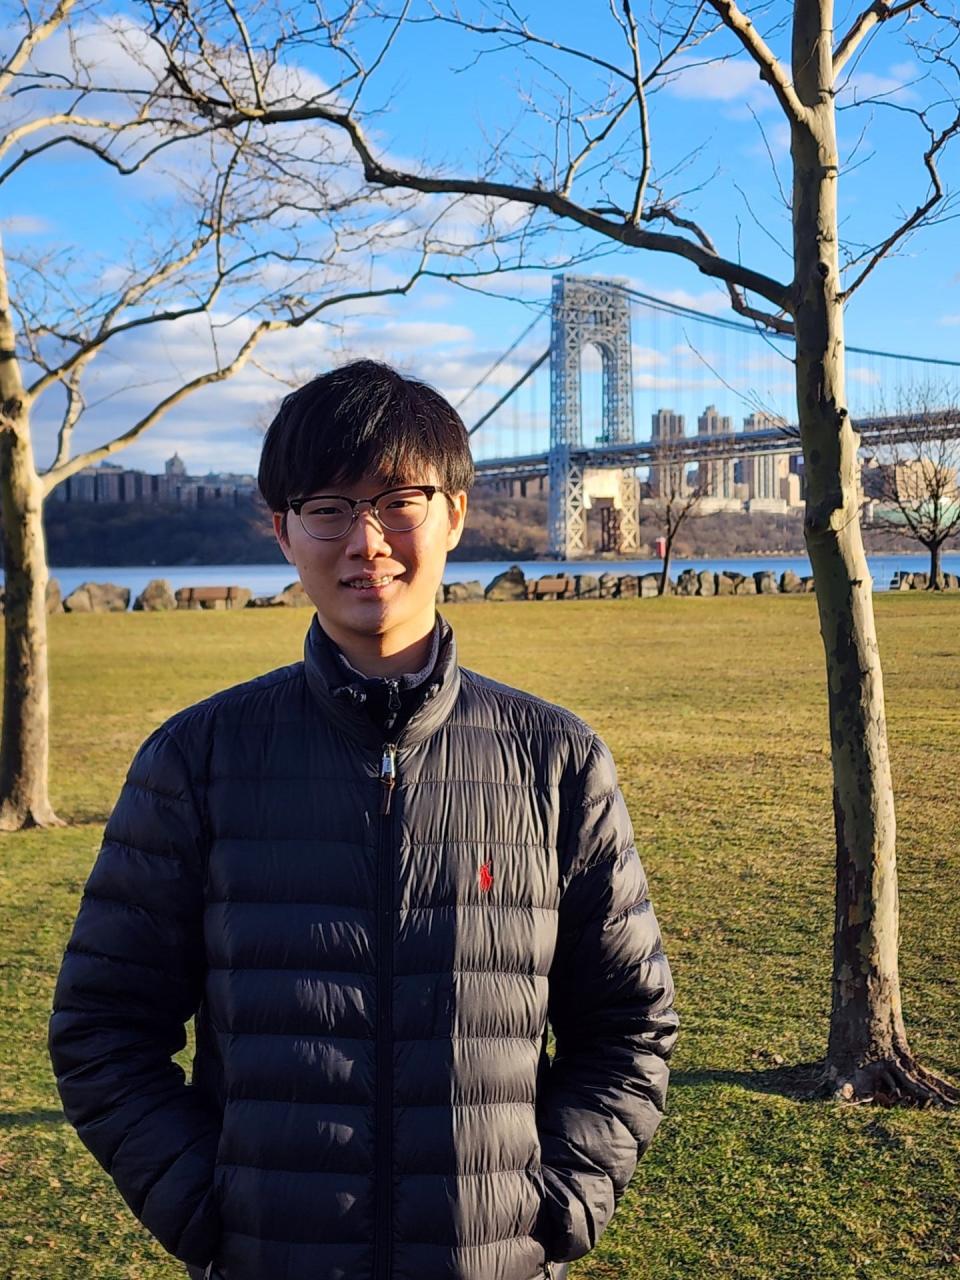 Bergen County Academies student William Song has formed EcoHarmony, a nonprofit think tank to address issues about the environment and climate change with Edison resident Aadithya Srinivasan.